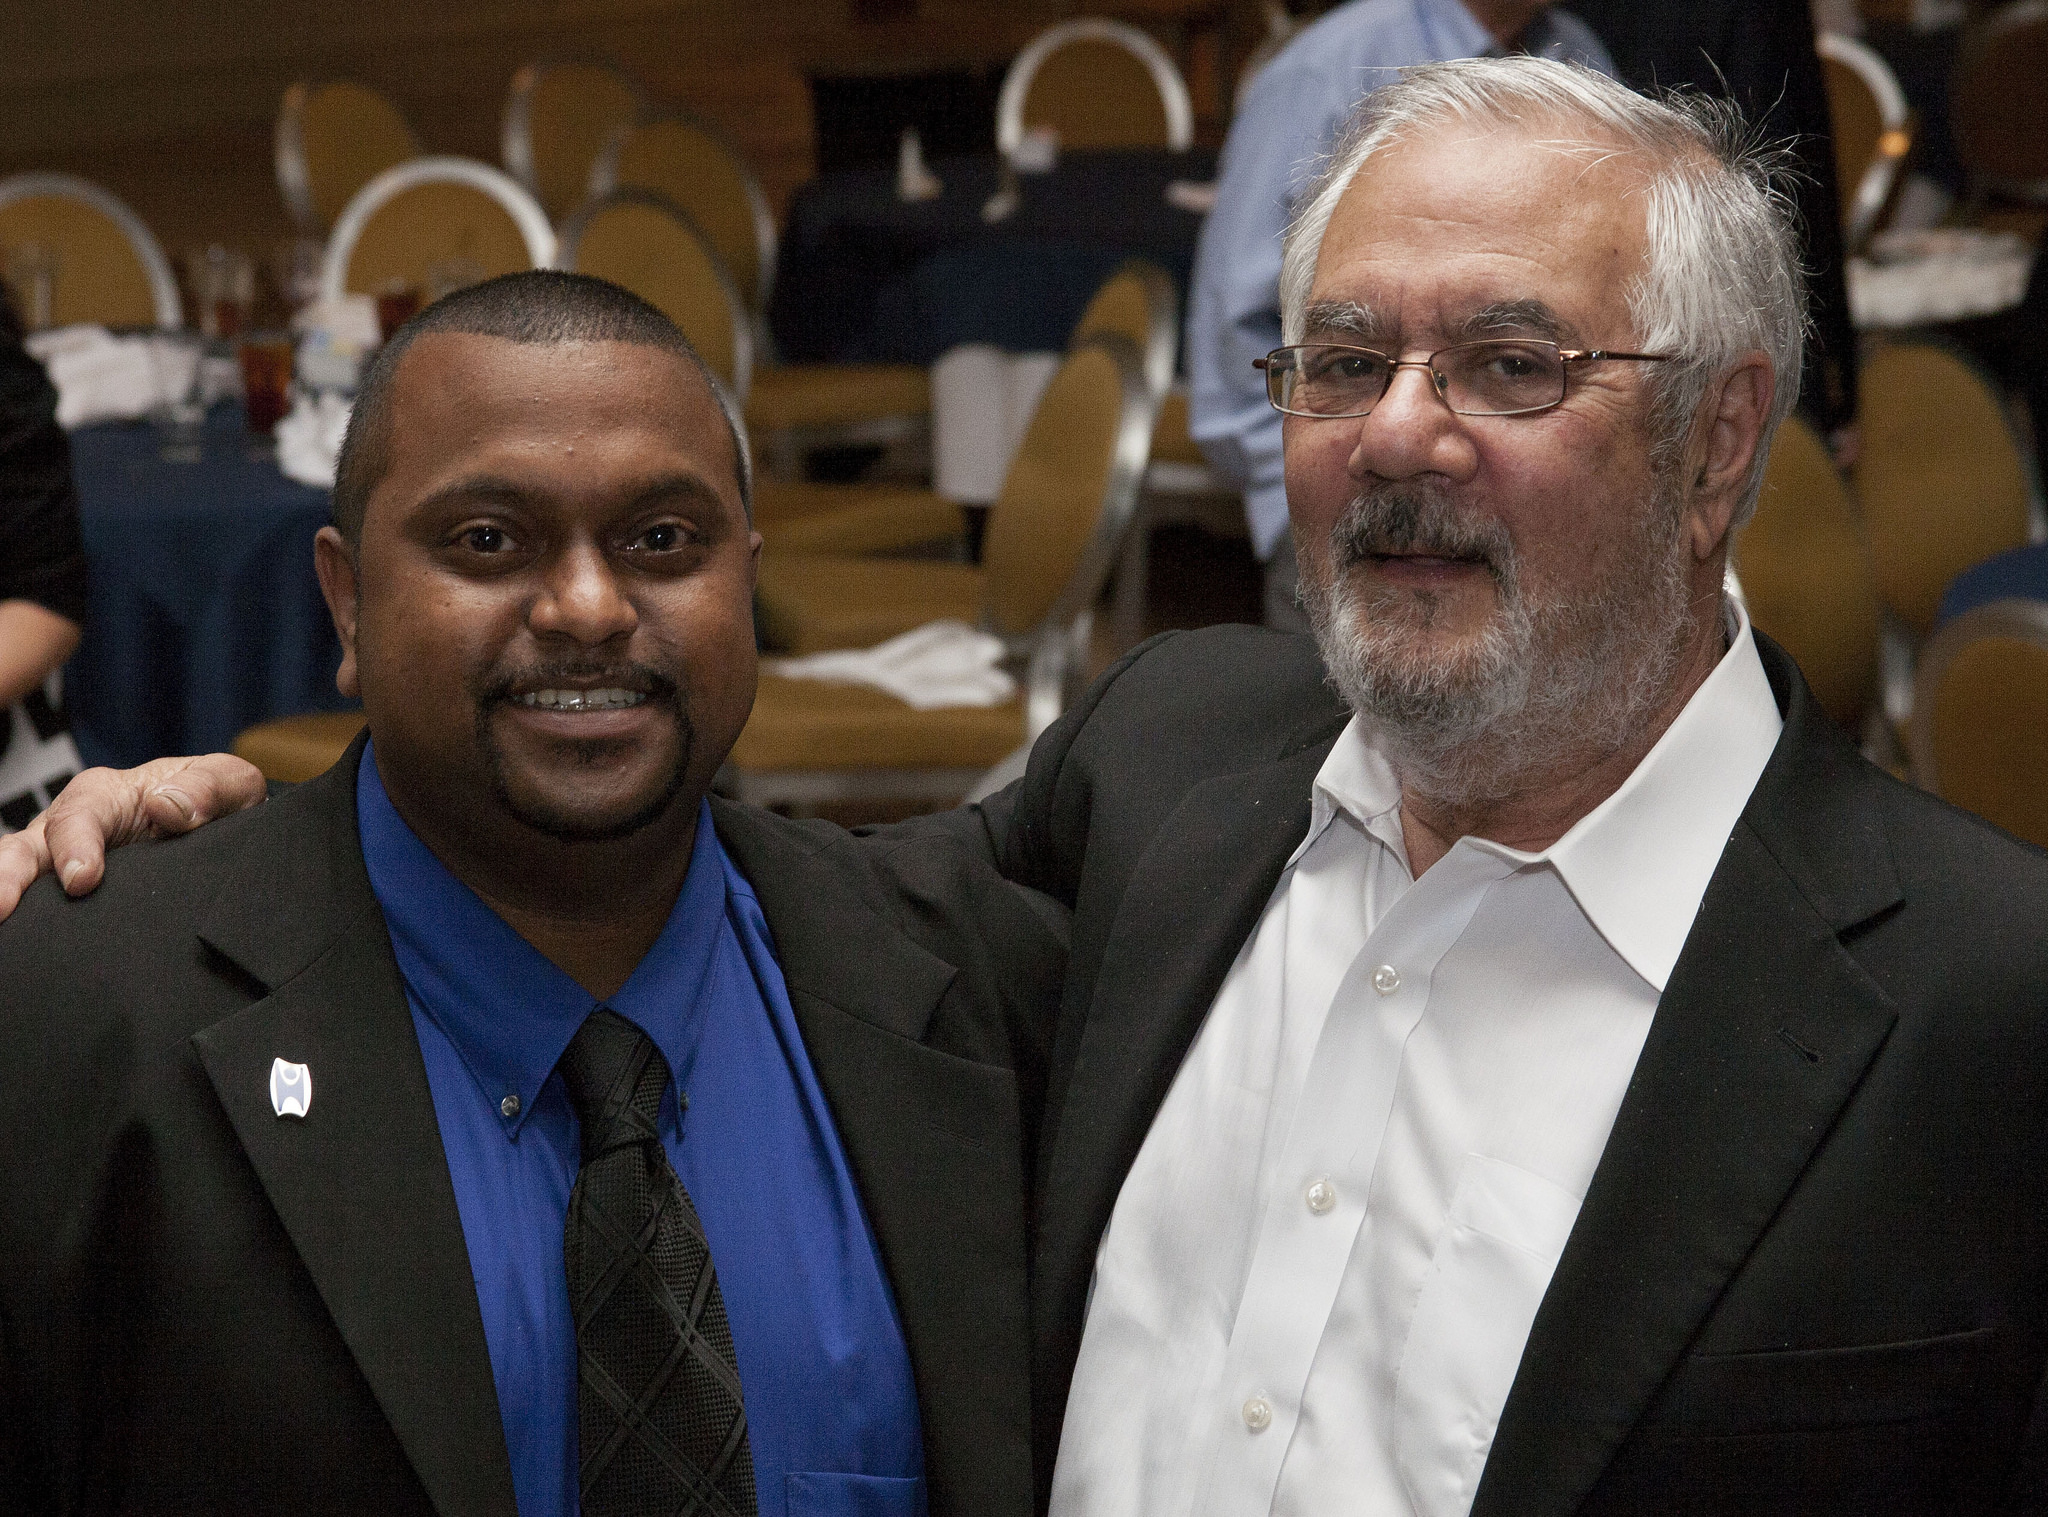 Bishop McNeill, Freethought Equality Fund PAC Coordinator, with 2014 Humanist of the Year Barney Frank